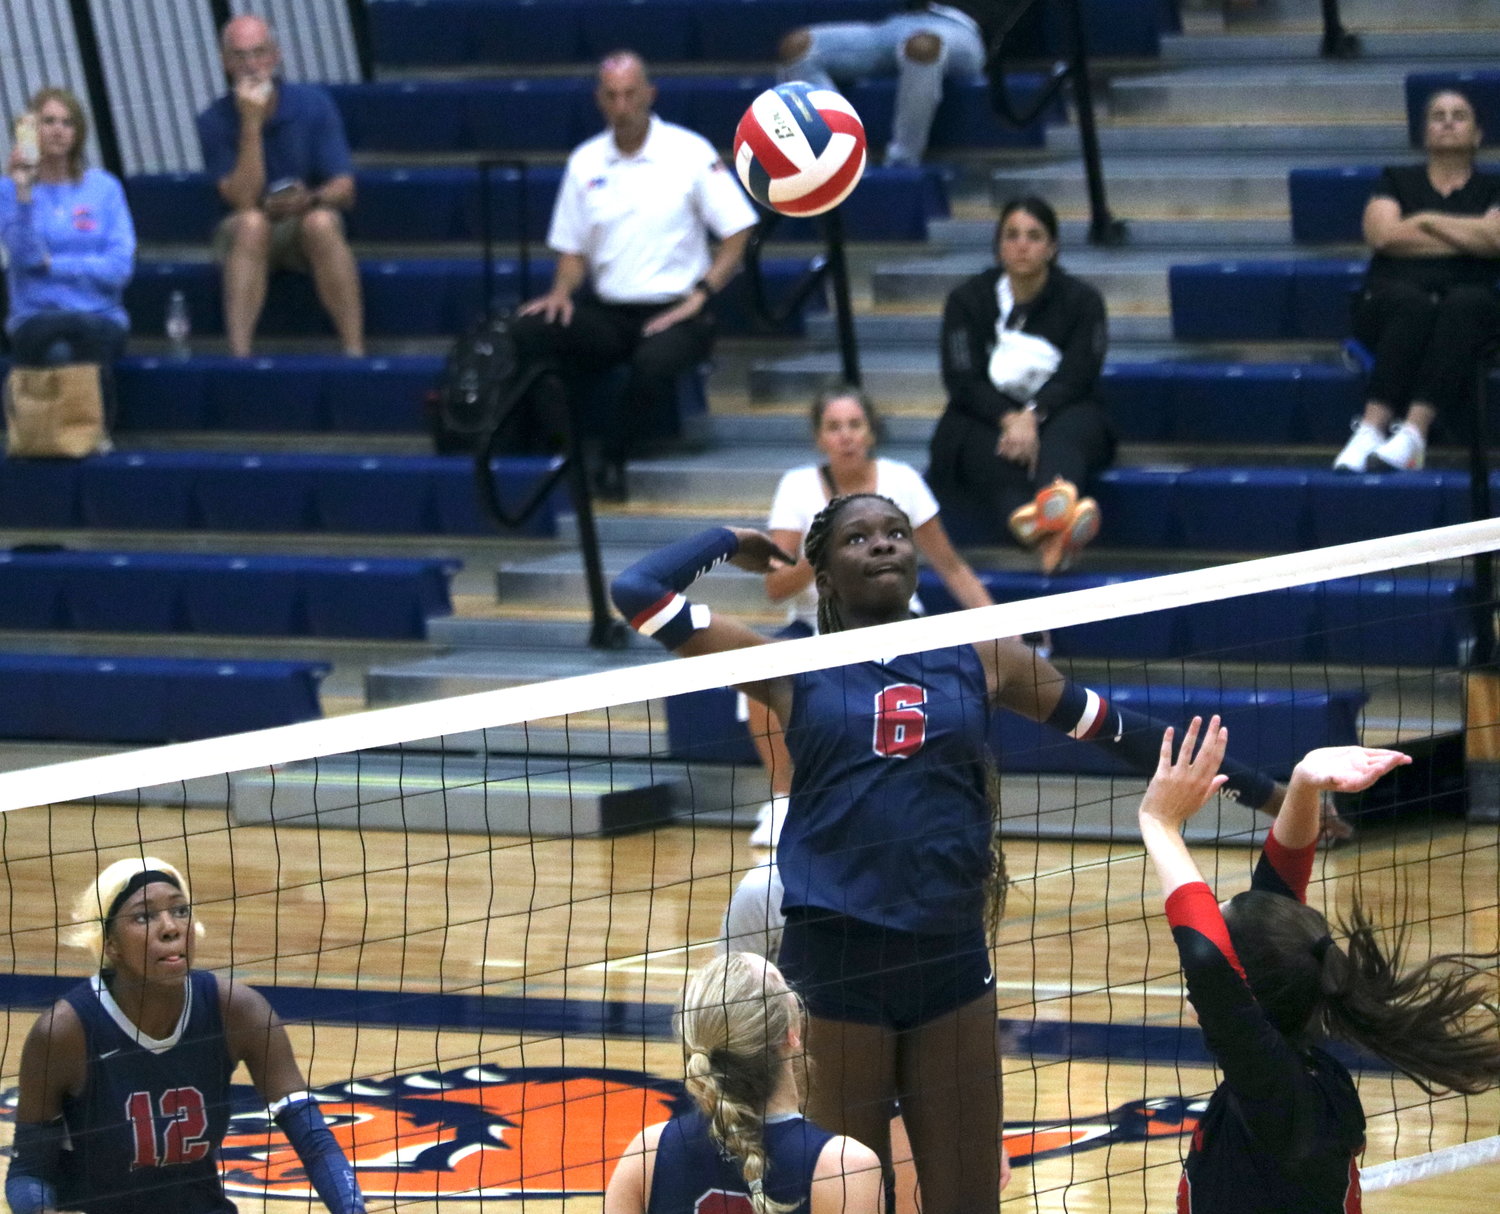 Tompkins’ Simi Elliott spikes a ball against Canyon in the finals match of gold bracket Katy ISD/Cy-Fair Tournament at Bridgeland.